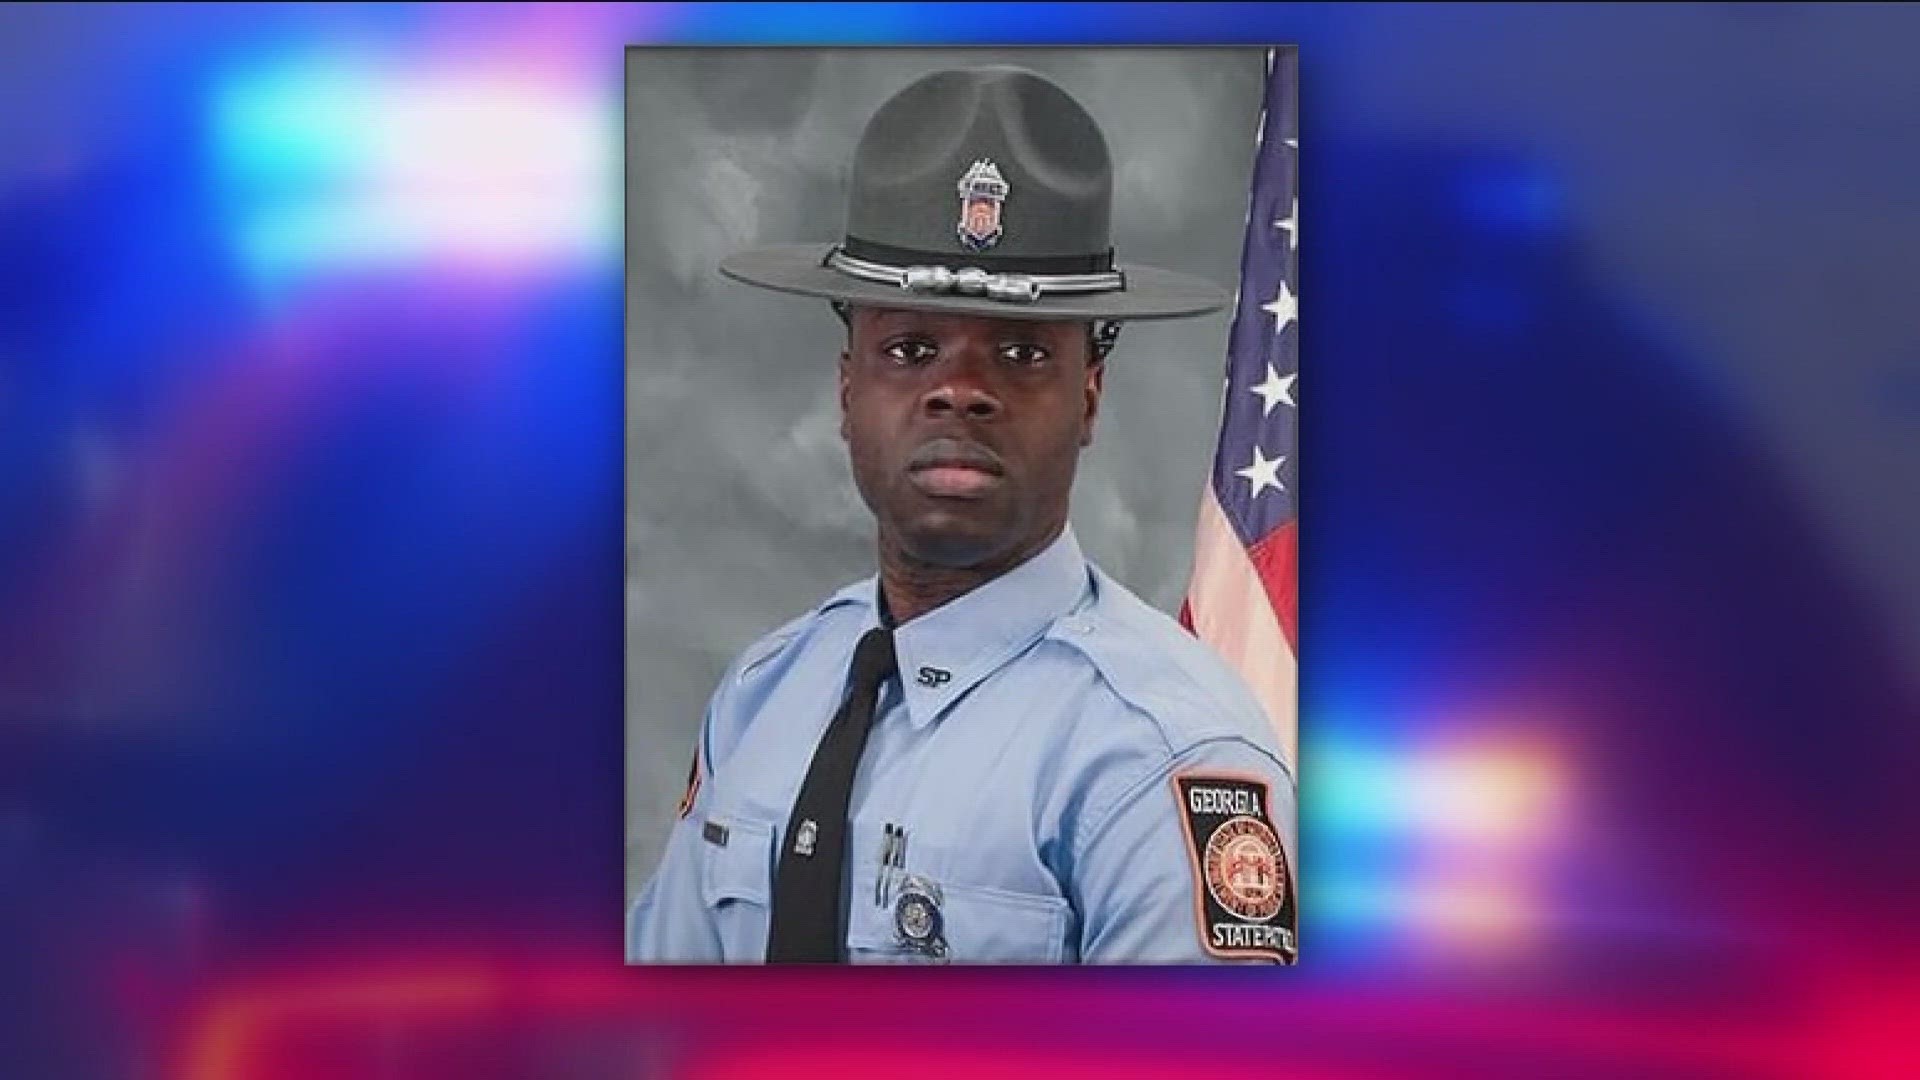 Born in Haiti and raised with a fierce work ethic, Jimmy Cenescar is remembered as a young law enforcement officer who had a bright  future ahead.